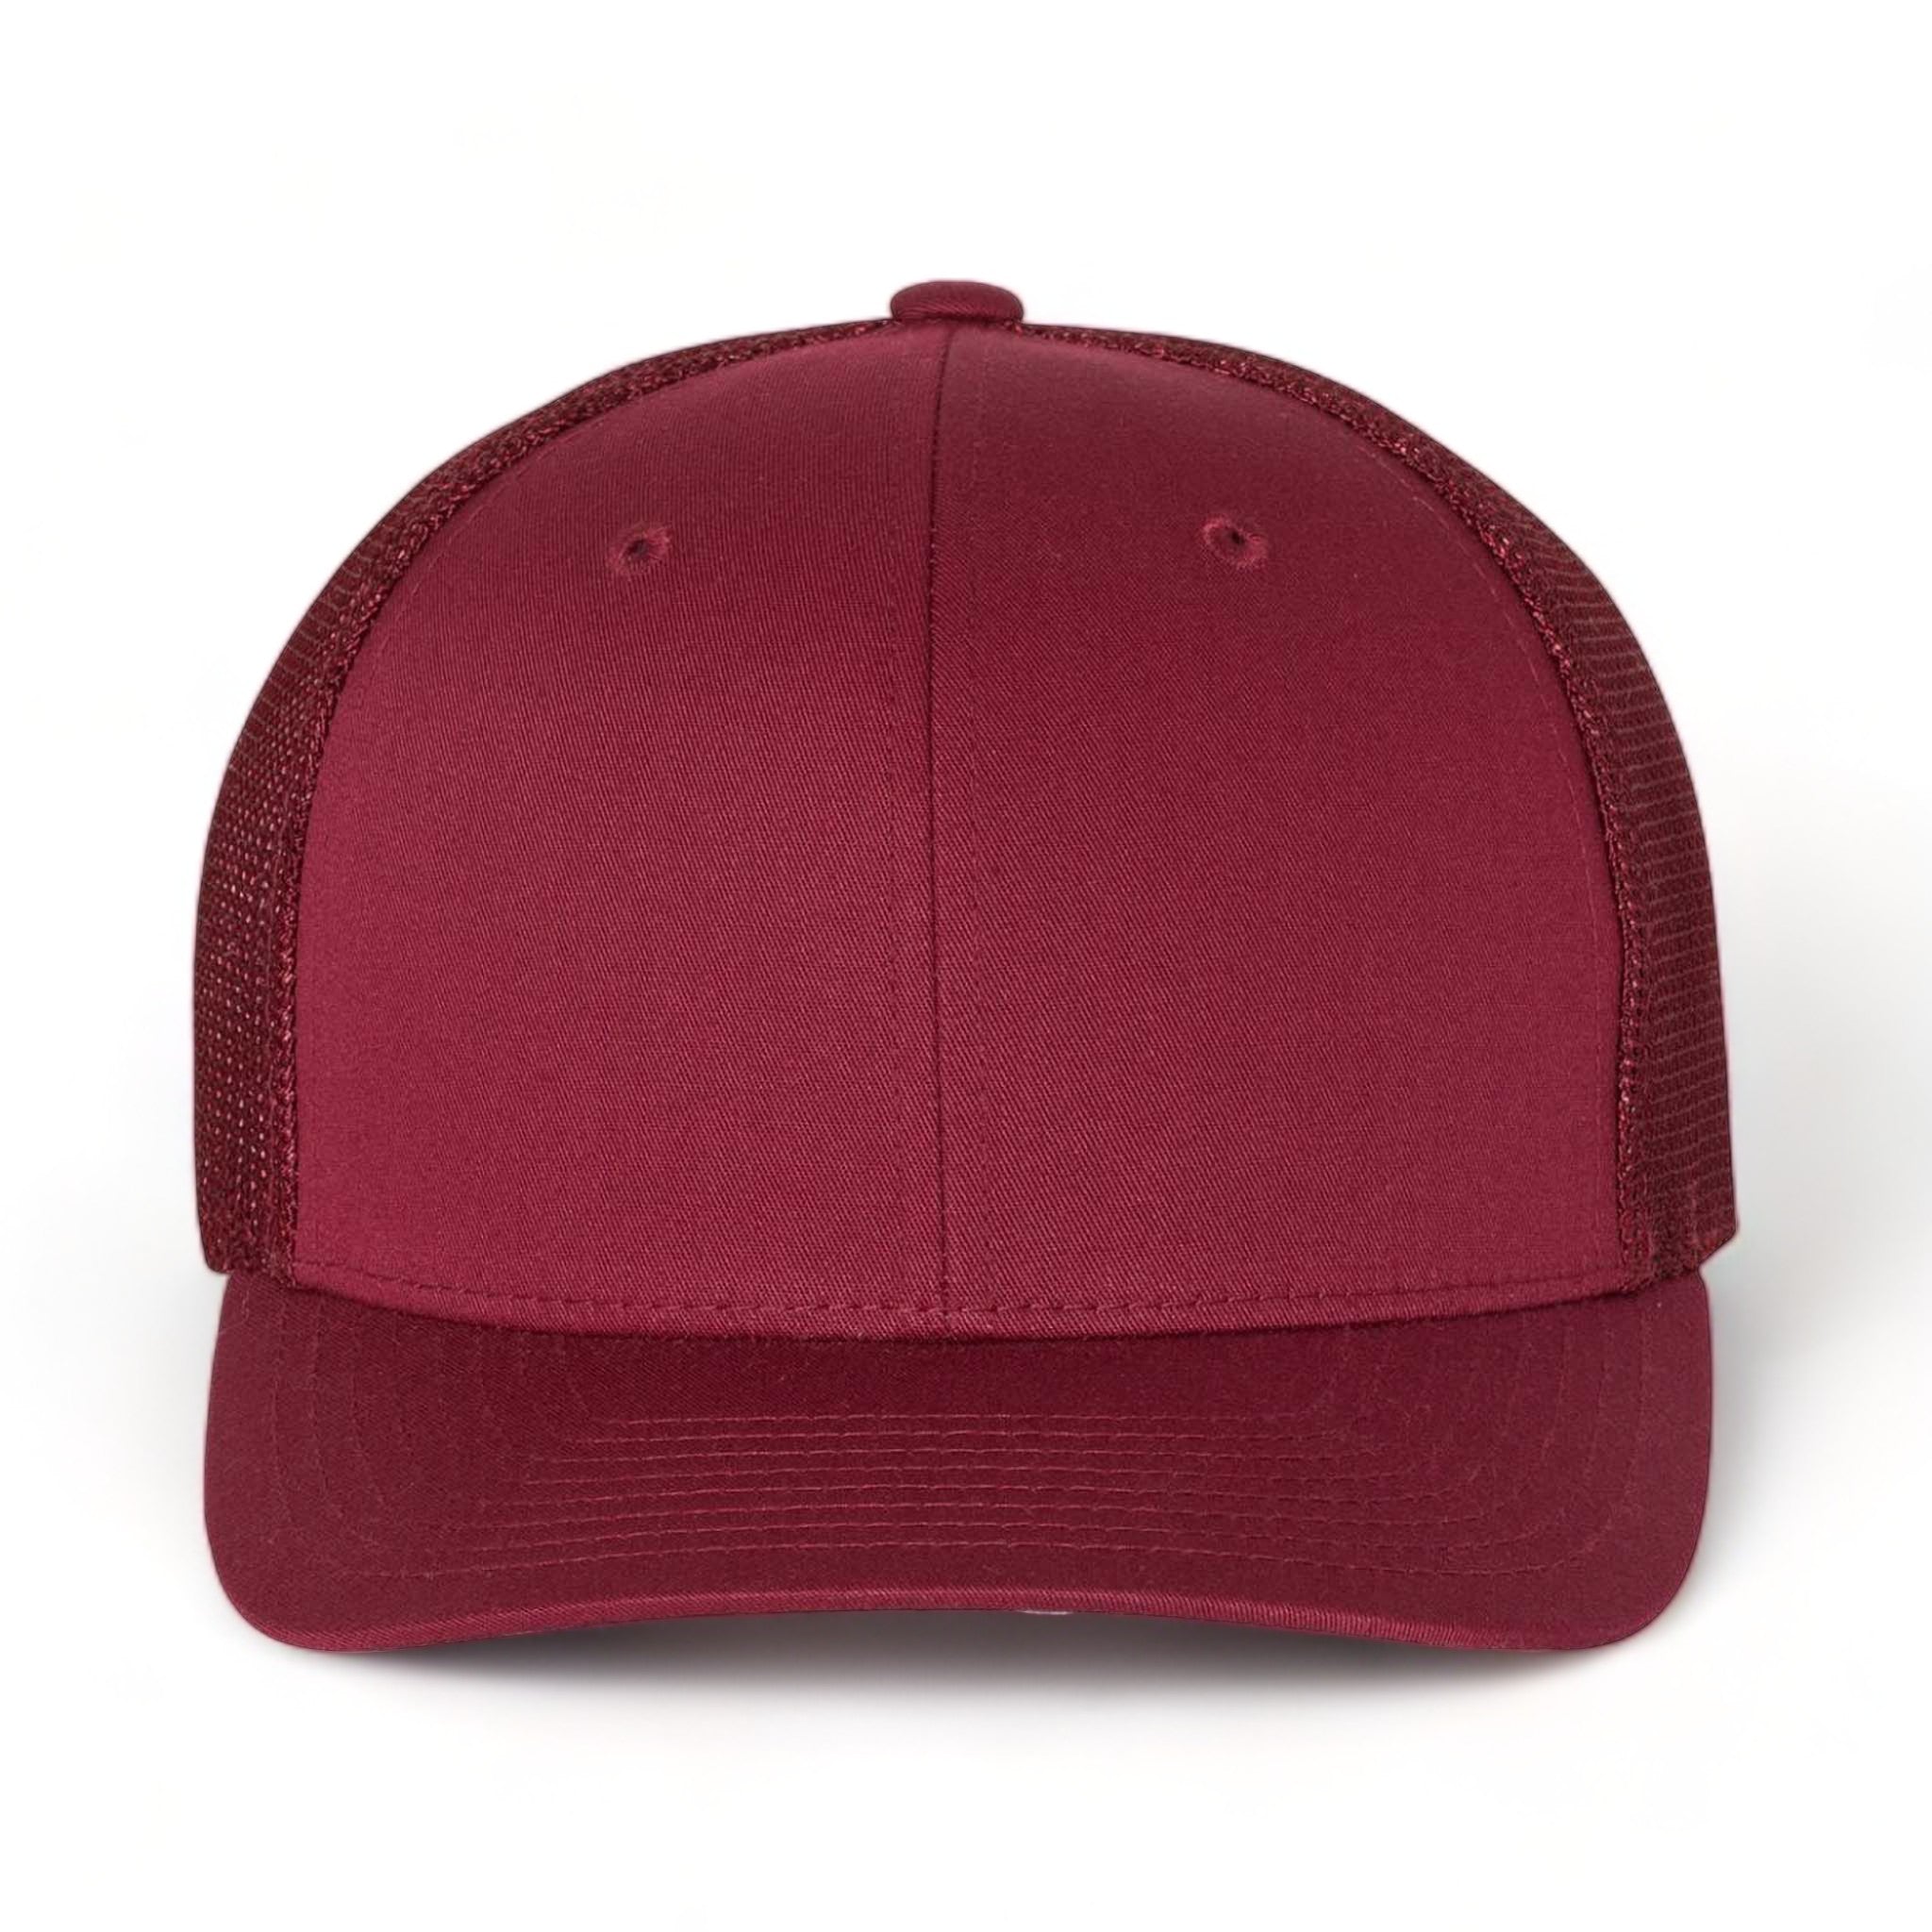 Front view of Flexfit 6511 custom hat in cranberry